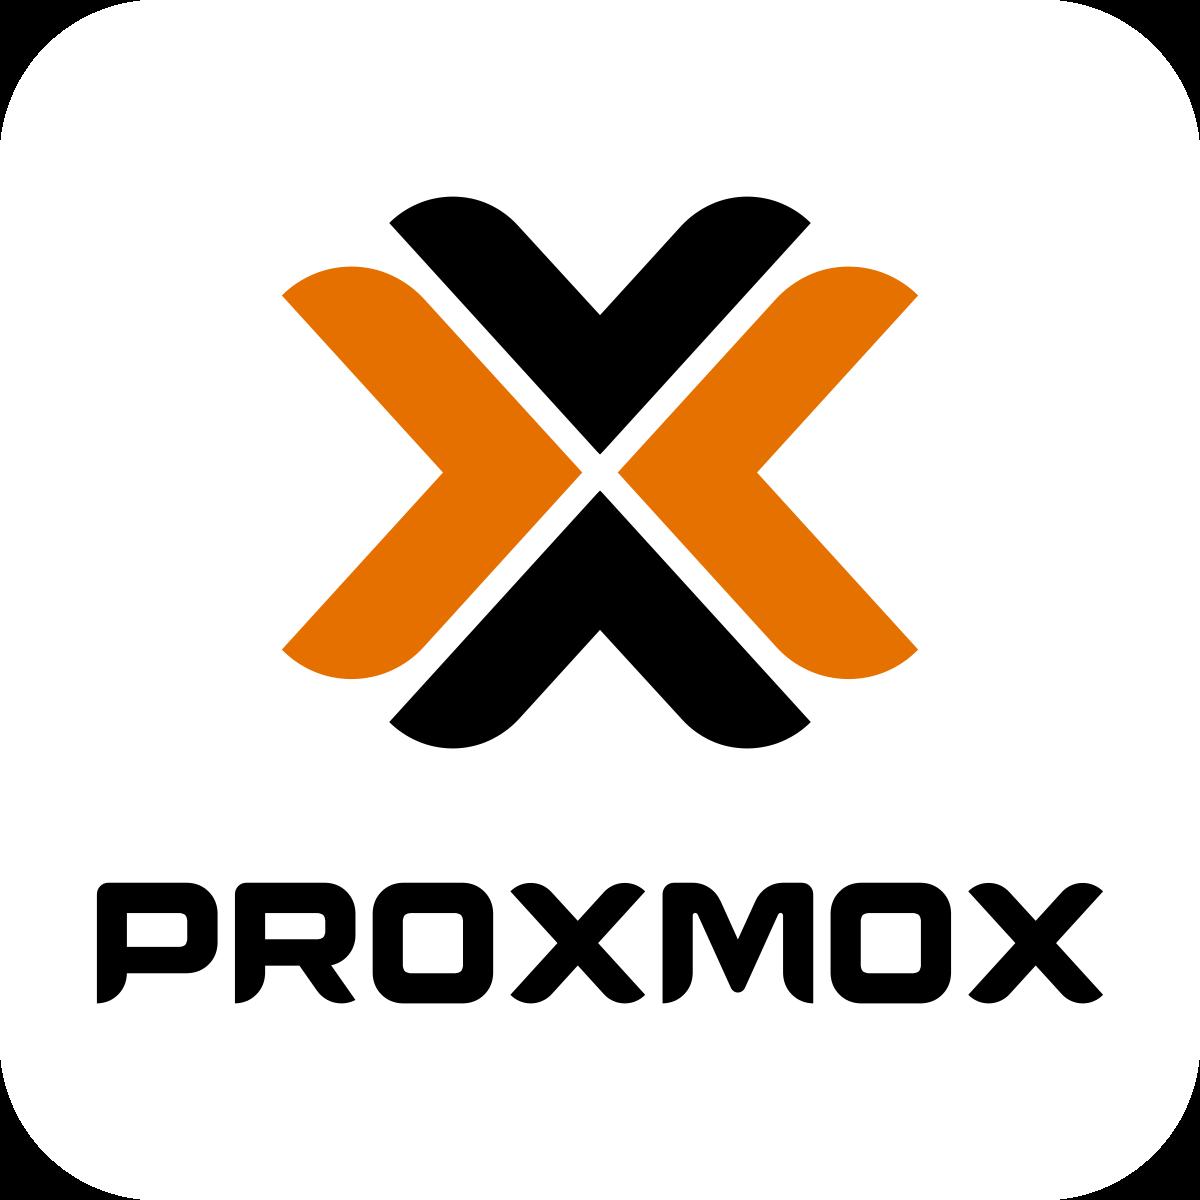 Proxmox-logo-stacked-white-background-1200.png.jpg